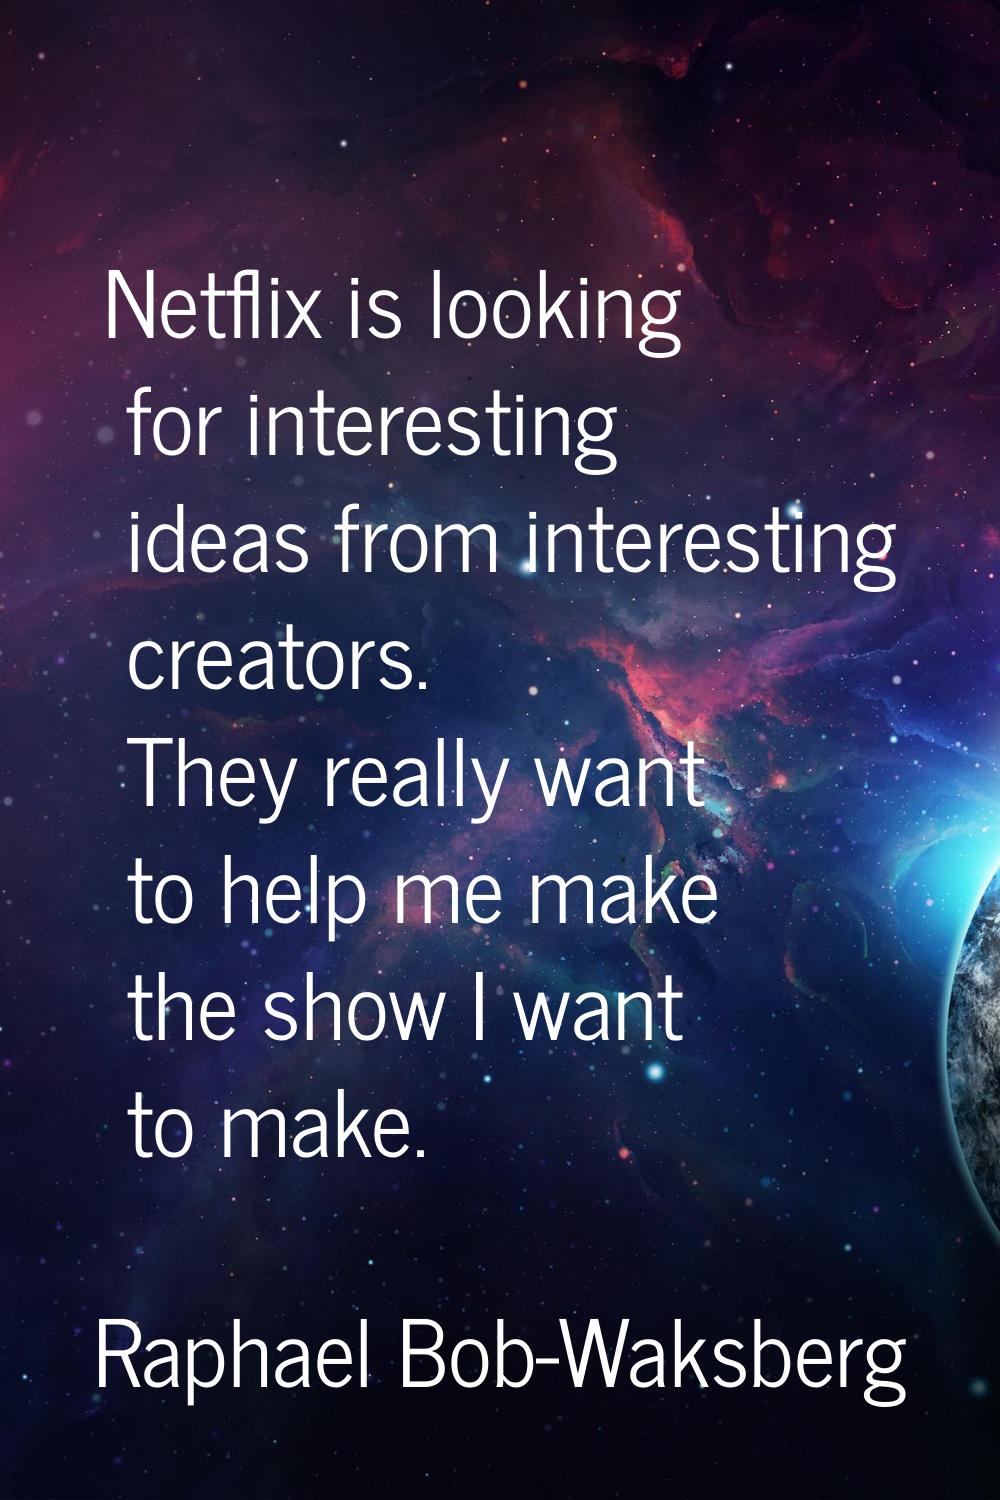 Netflix is looking for interesting ideas from interesting creators. They really want to help me mak